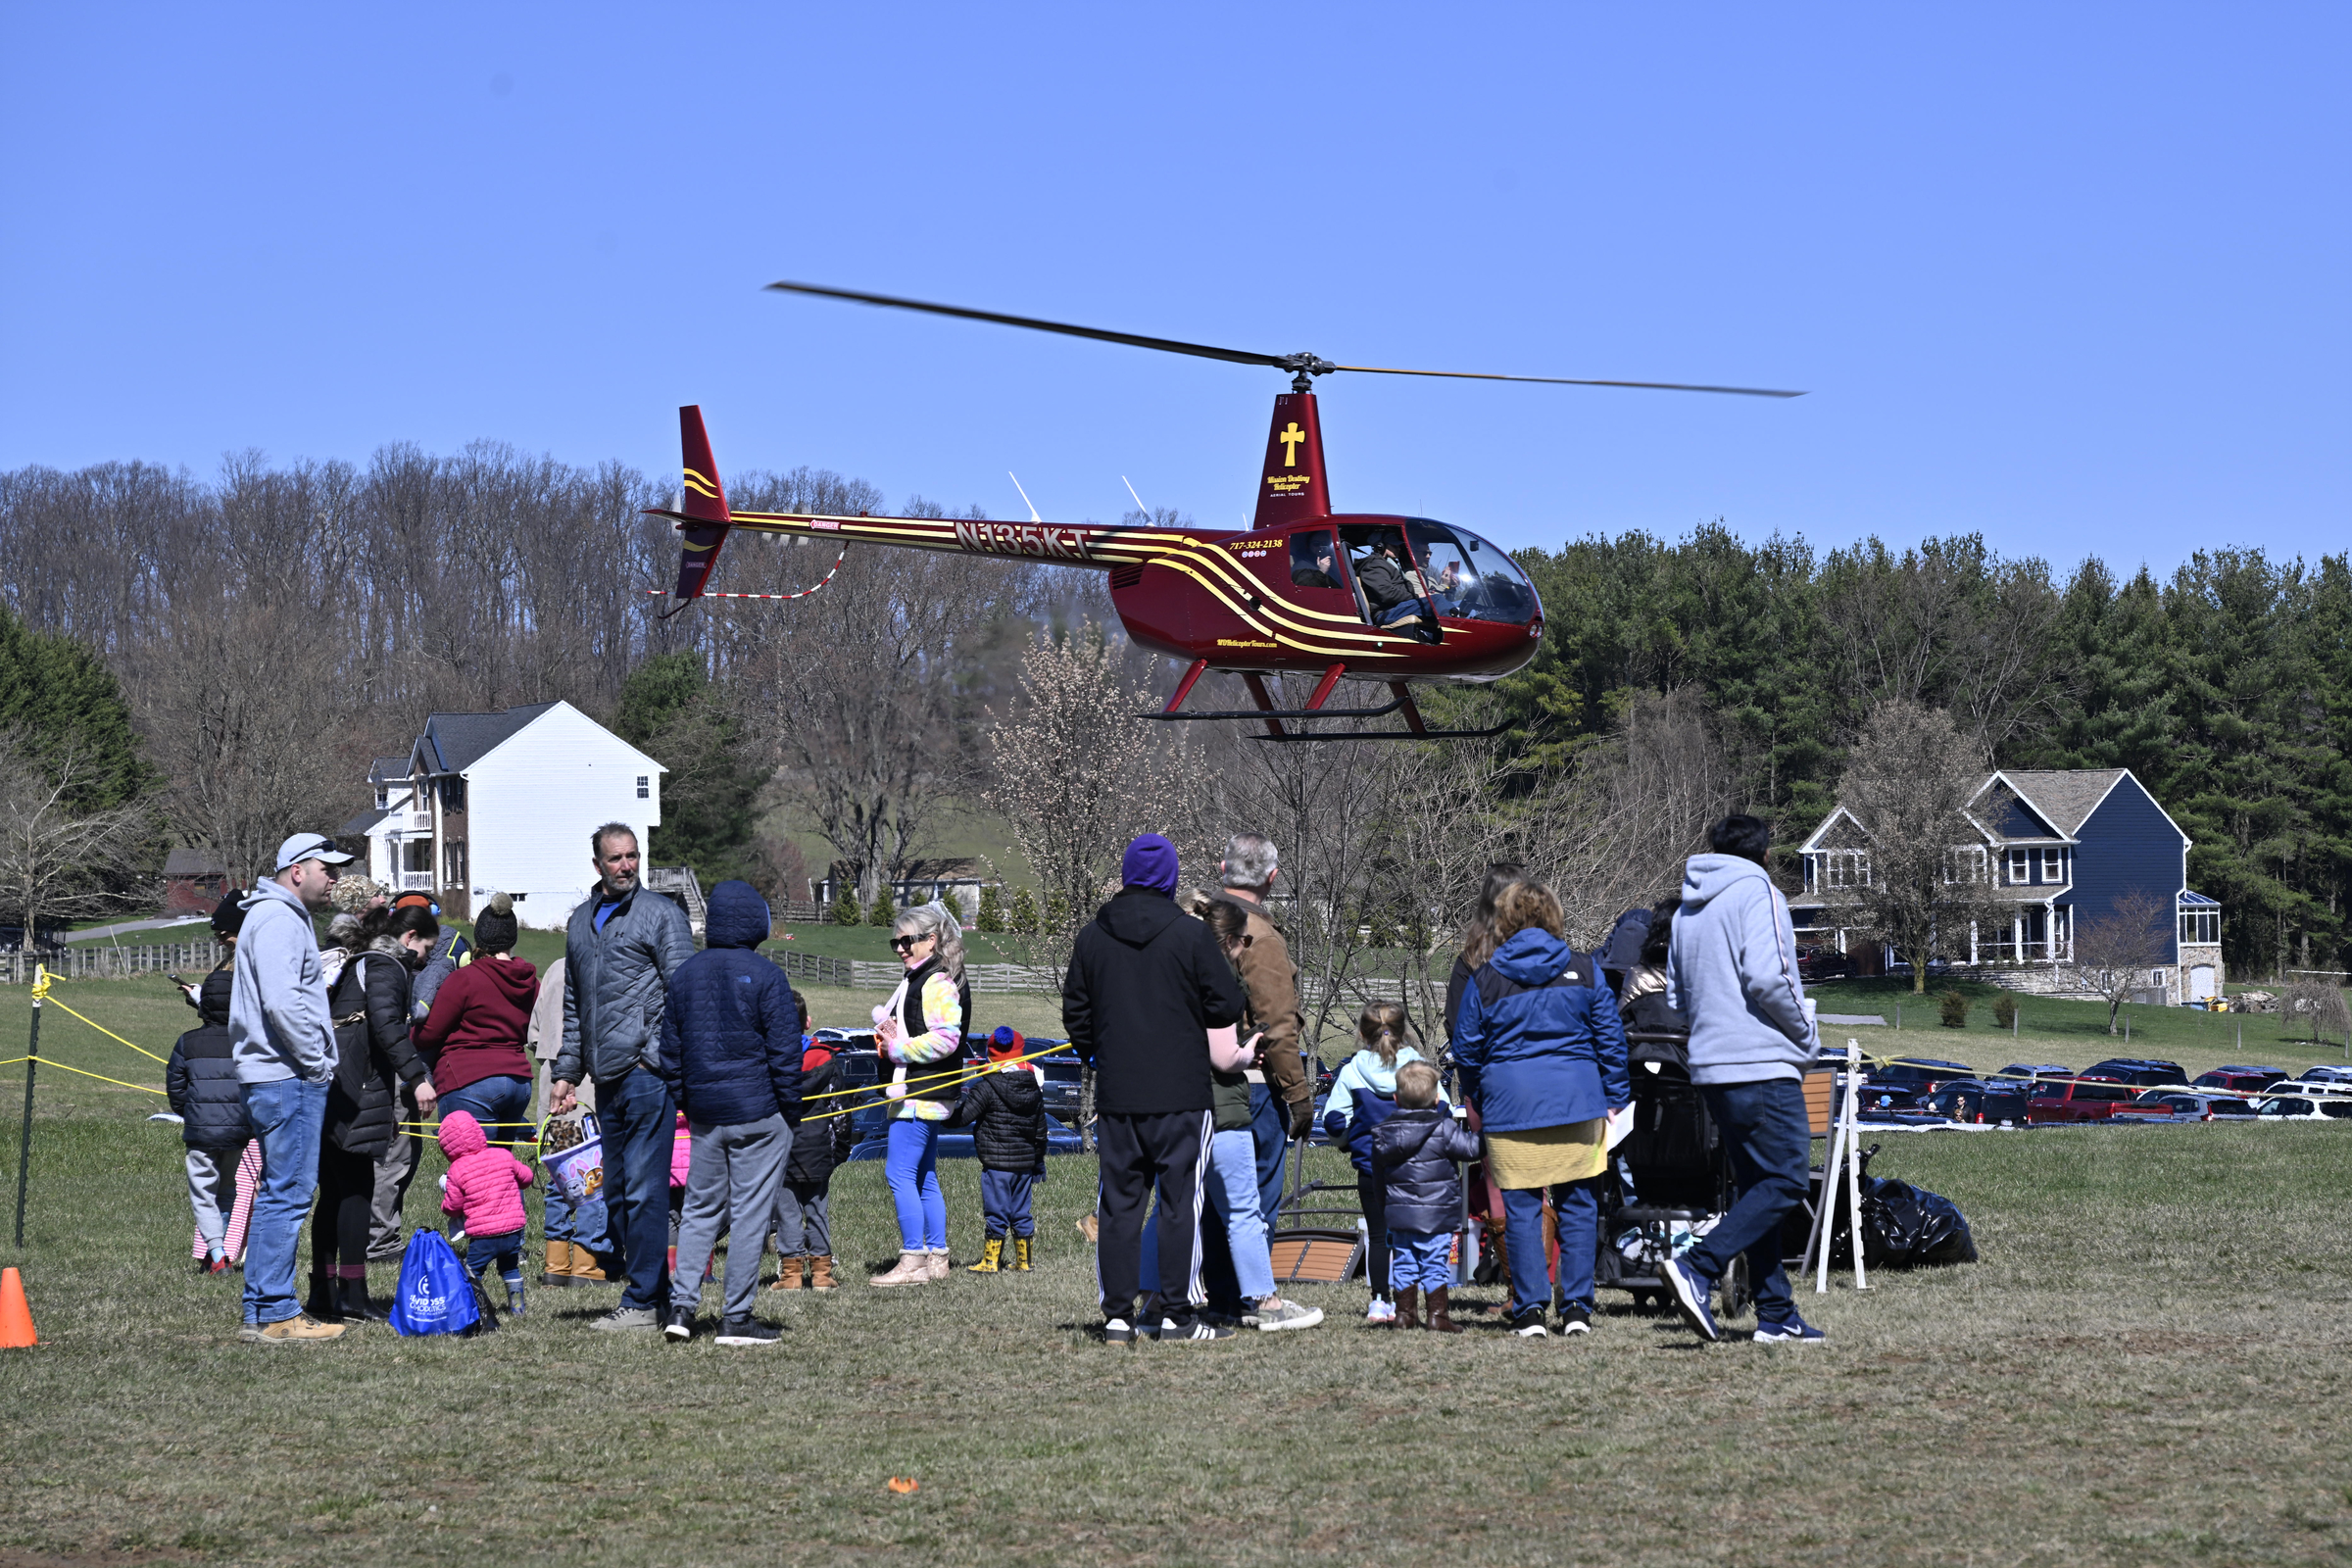 People wait in line for a helicopter ride during the Coppermine Eggstravaganza at Cascade Park in Hampstead. (Thomas Walker/Freelance)